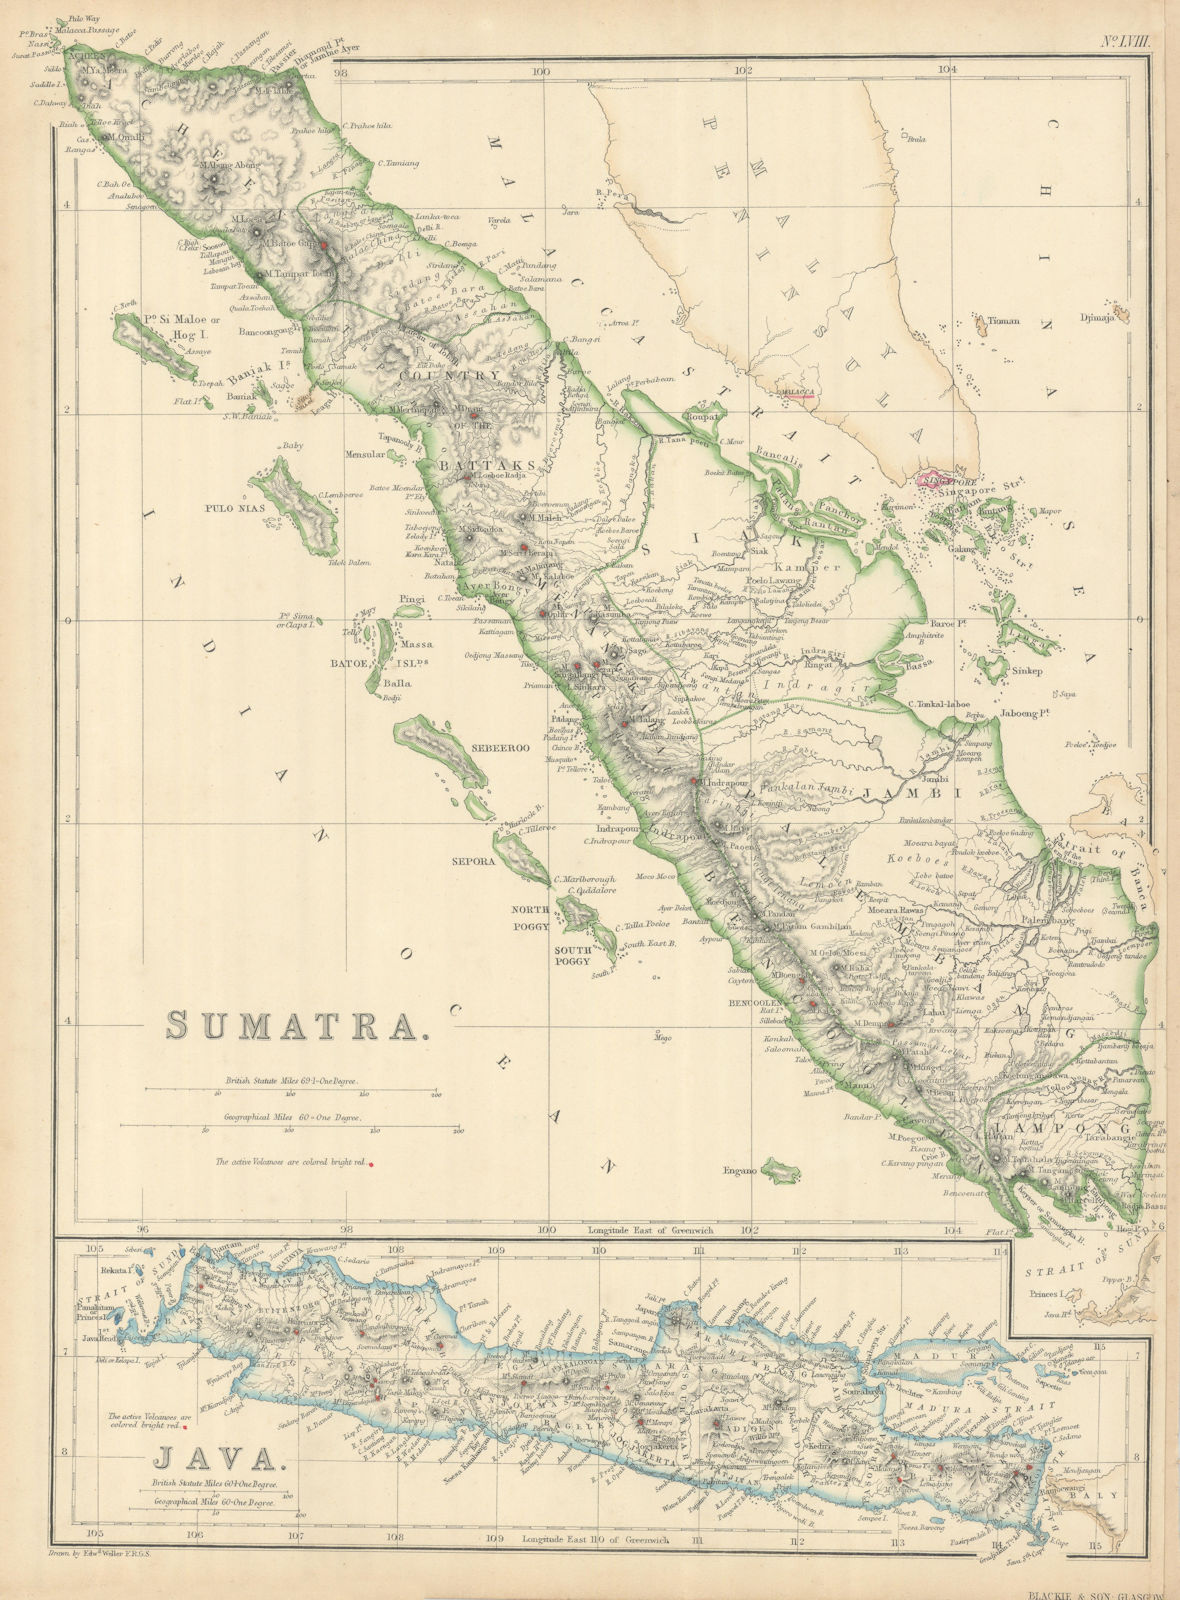 Associate Product Sumatra & Java showing volcanoes by Edward Weller. Indonesia 1860 old map